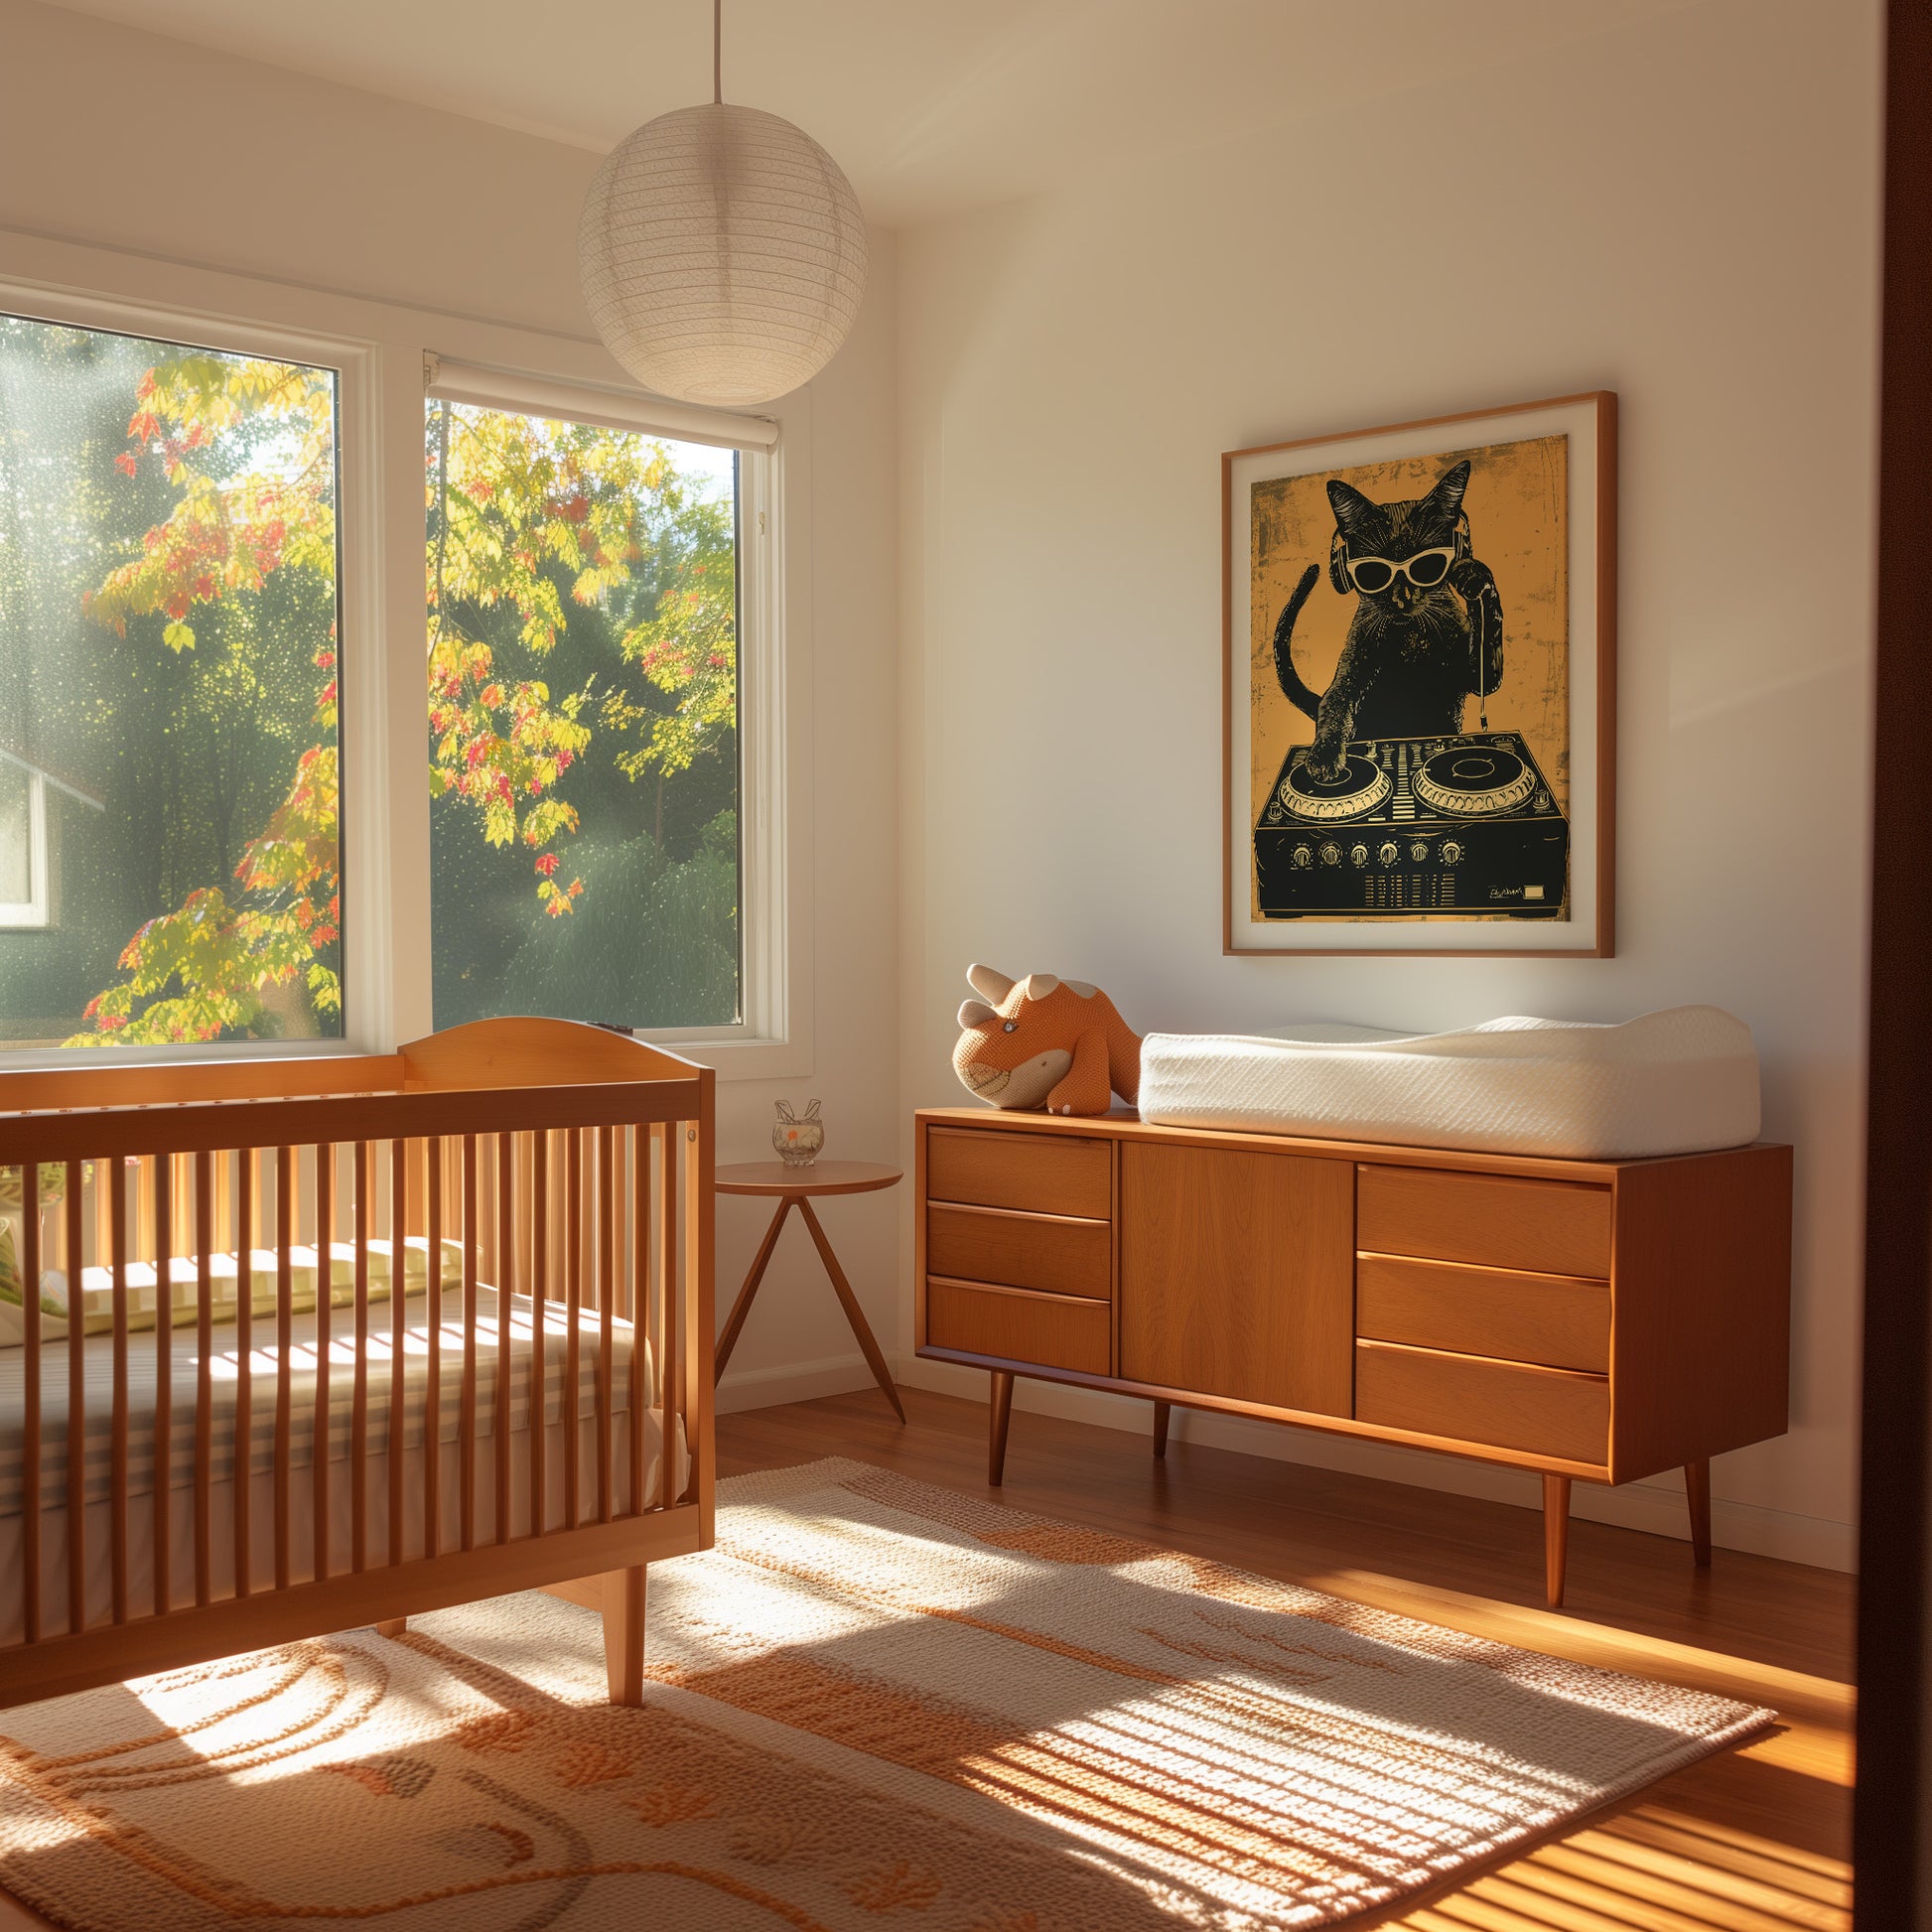 Sunny room with a wooden crib, dresser, and cat illustration on the wall.